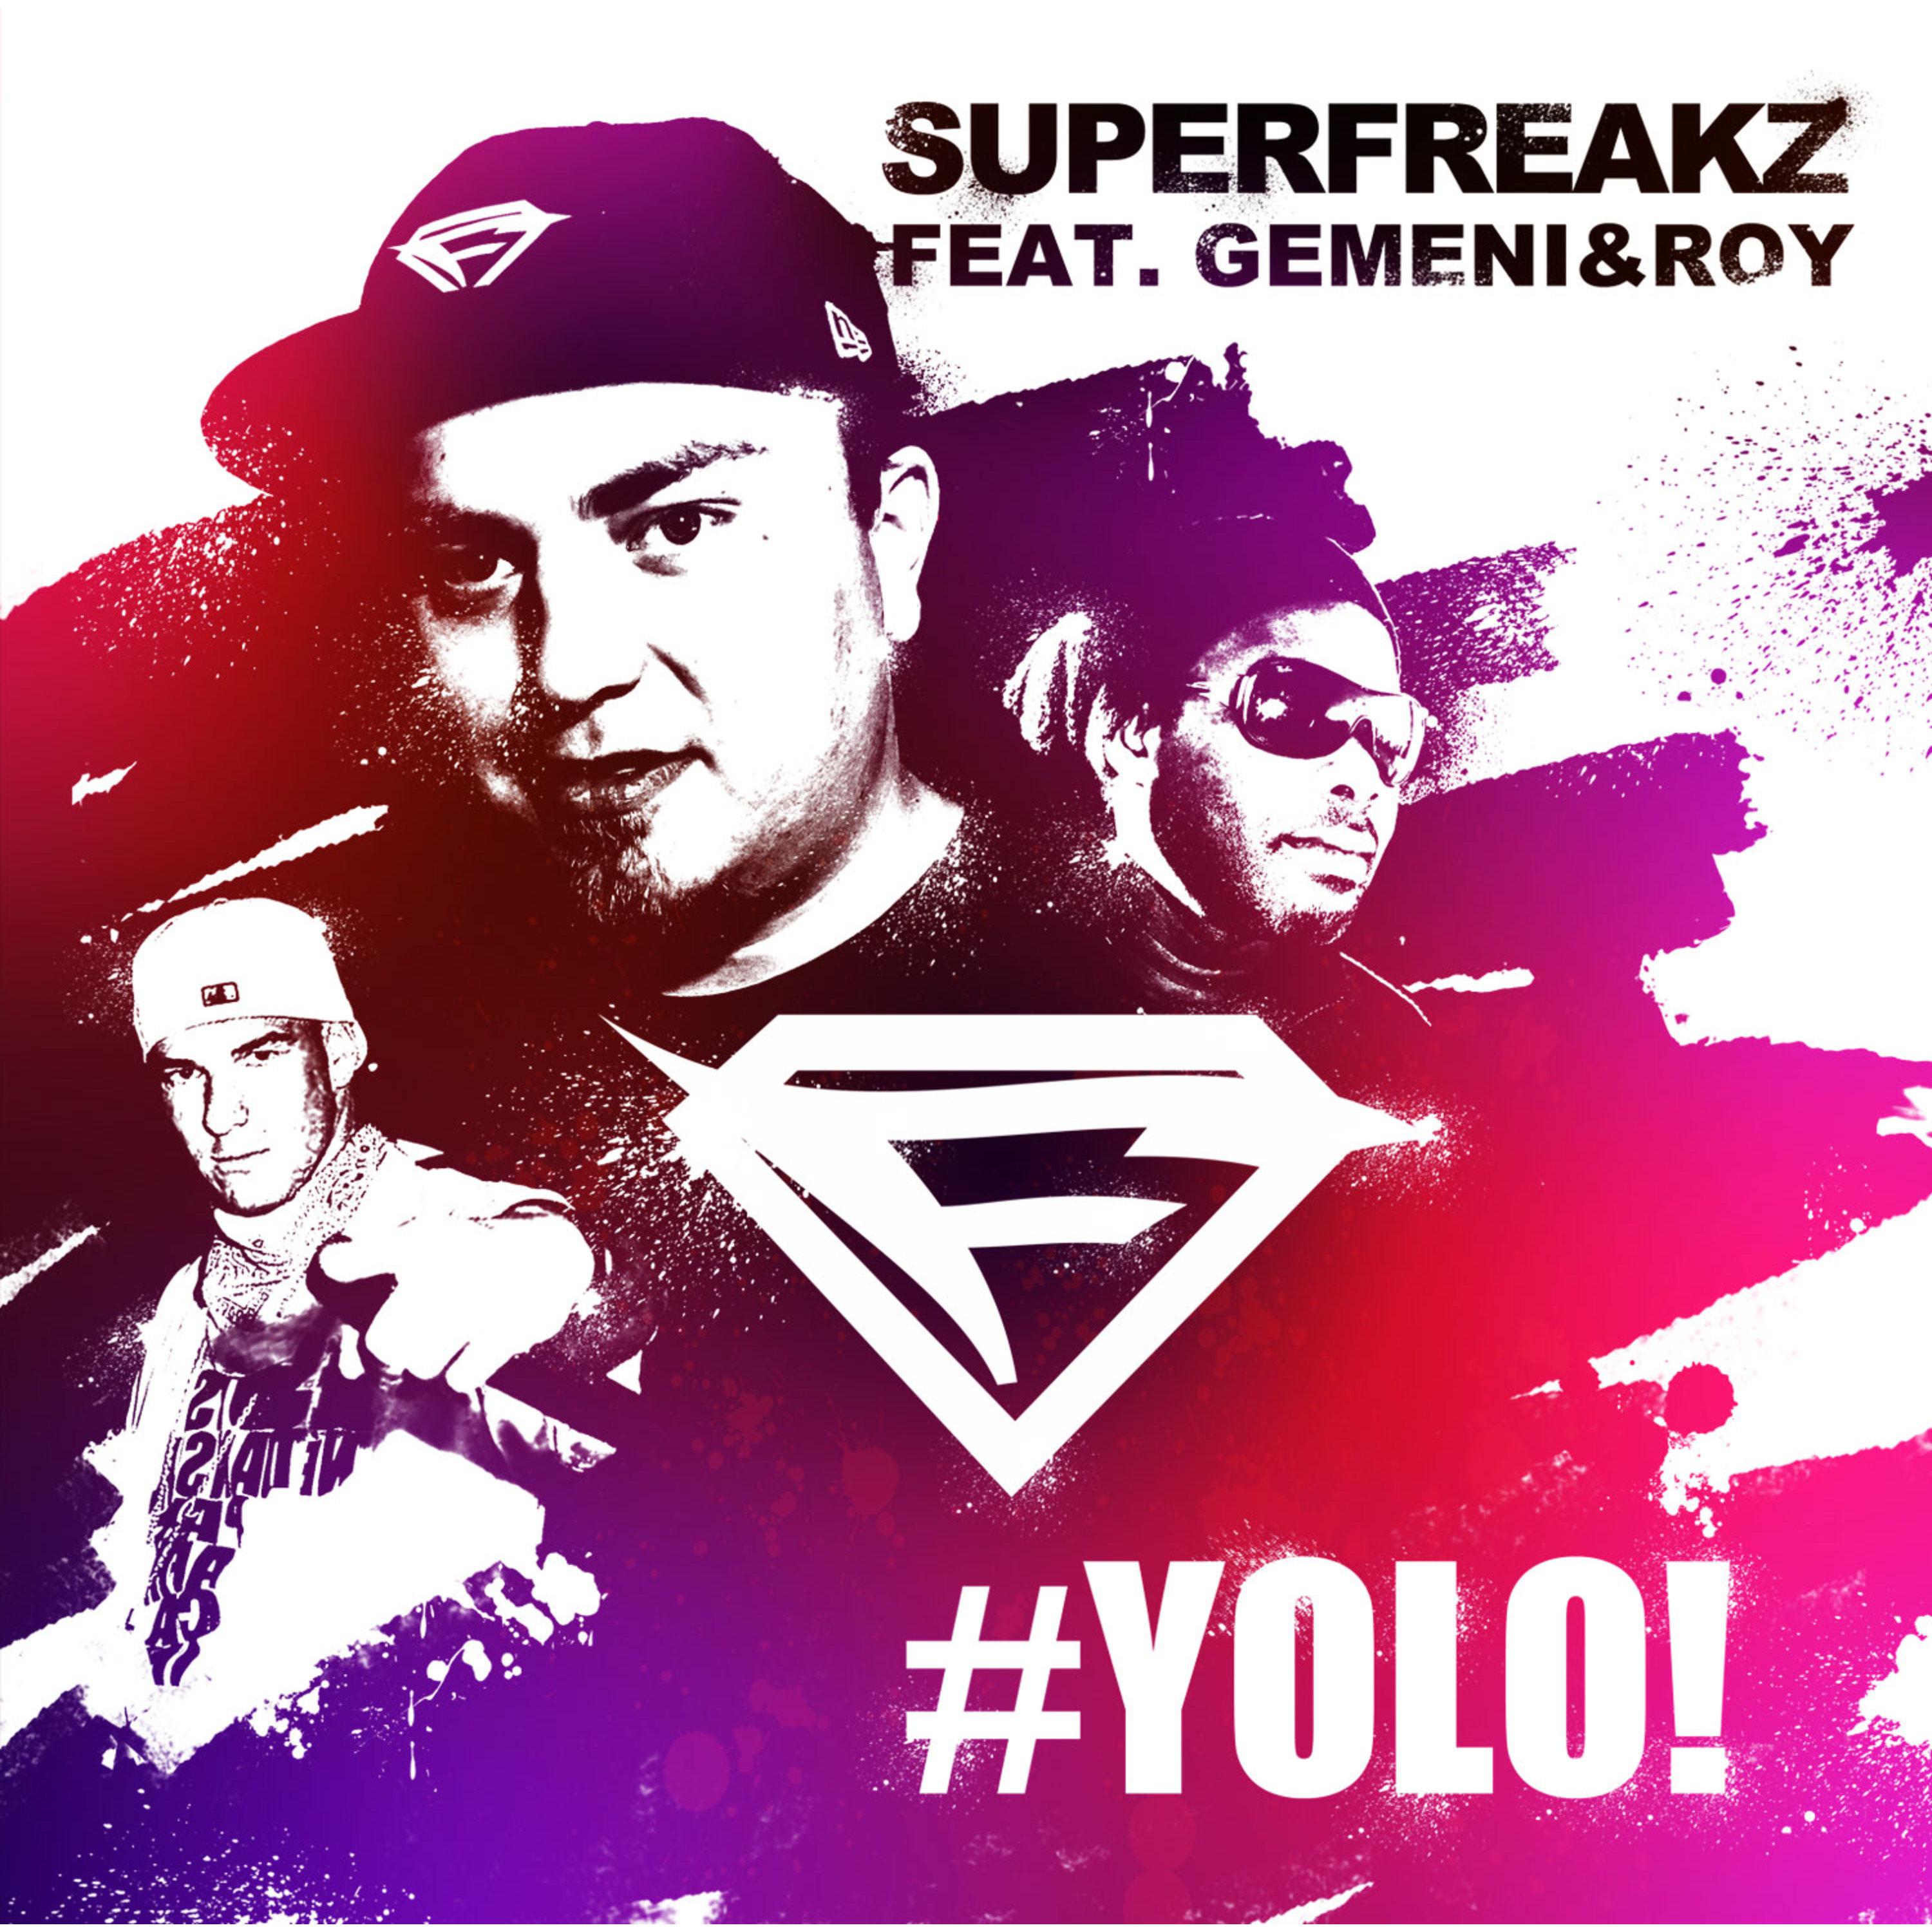 Yolo (Extended Mix)